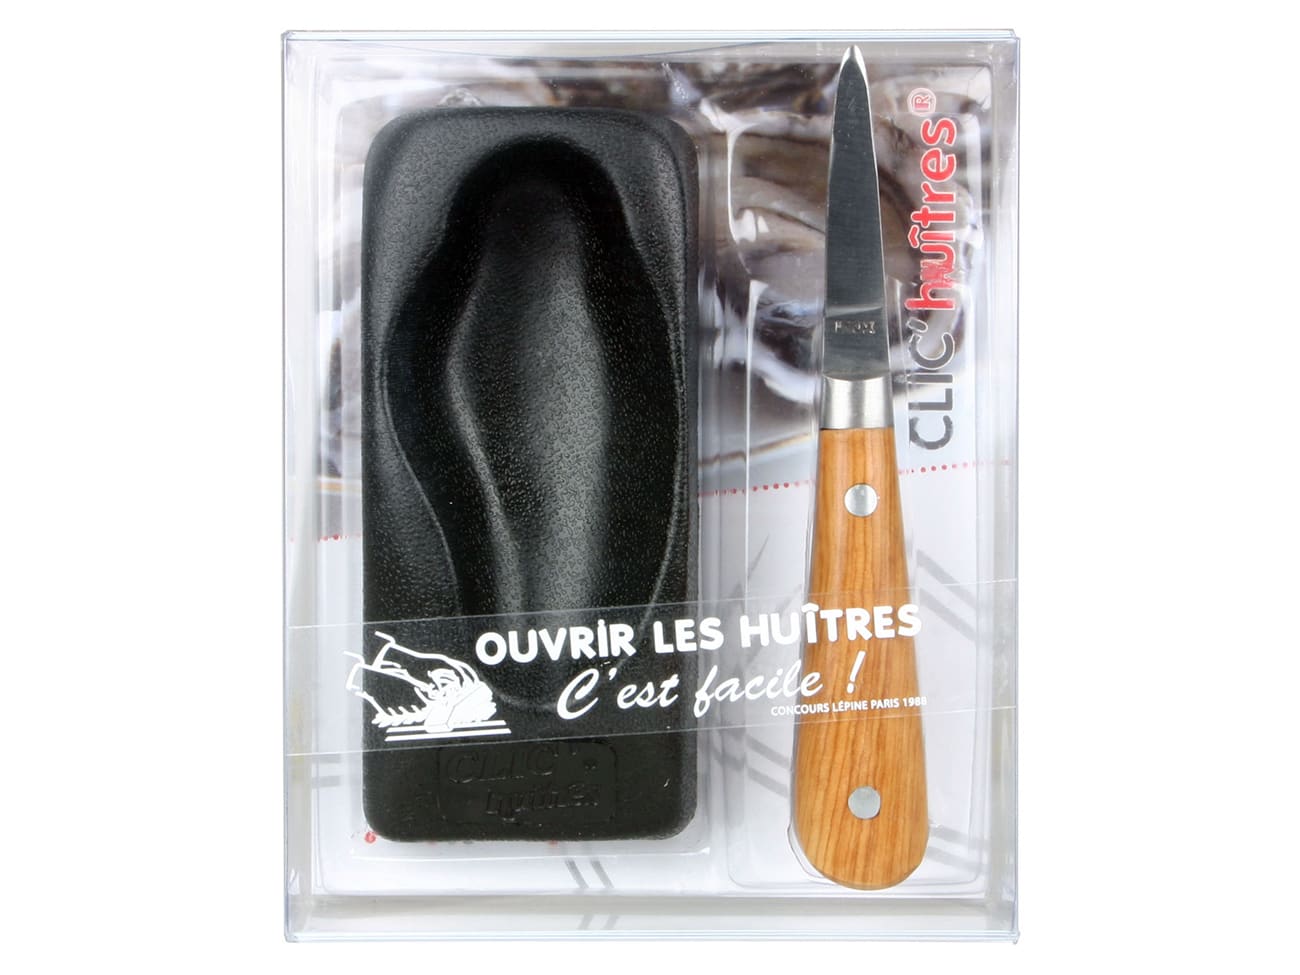 Oyster Knife with Shucking Block - Clic'huîtres - Meilleur du Chef